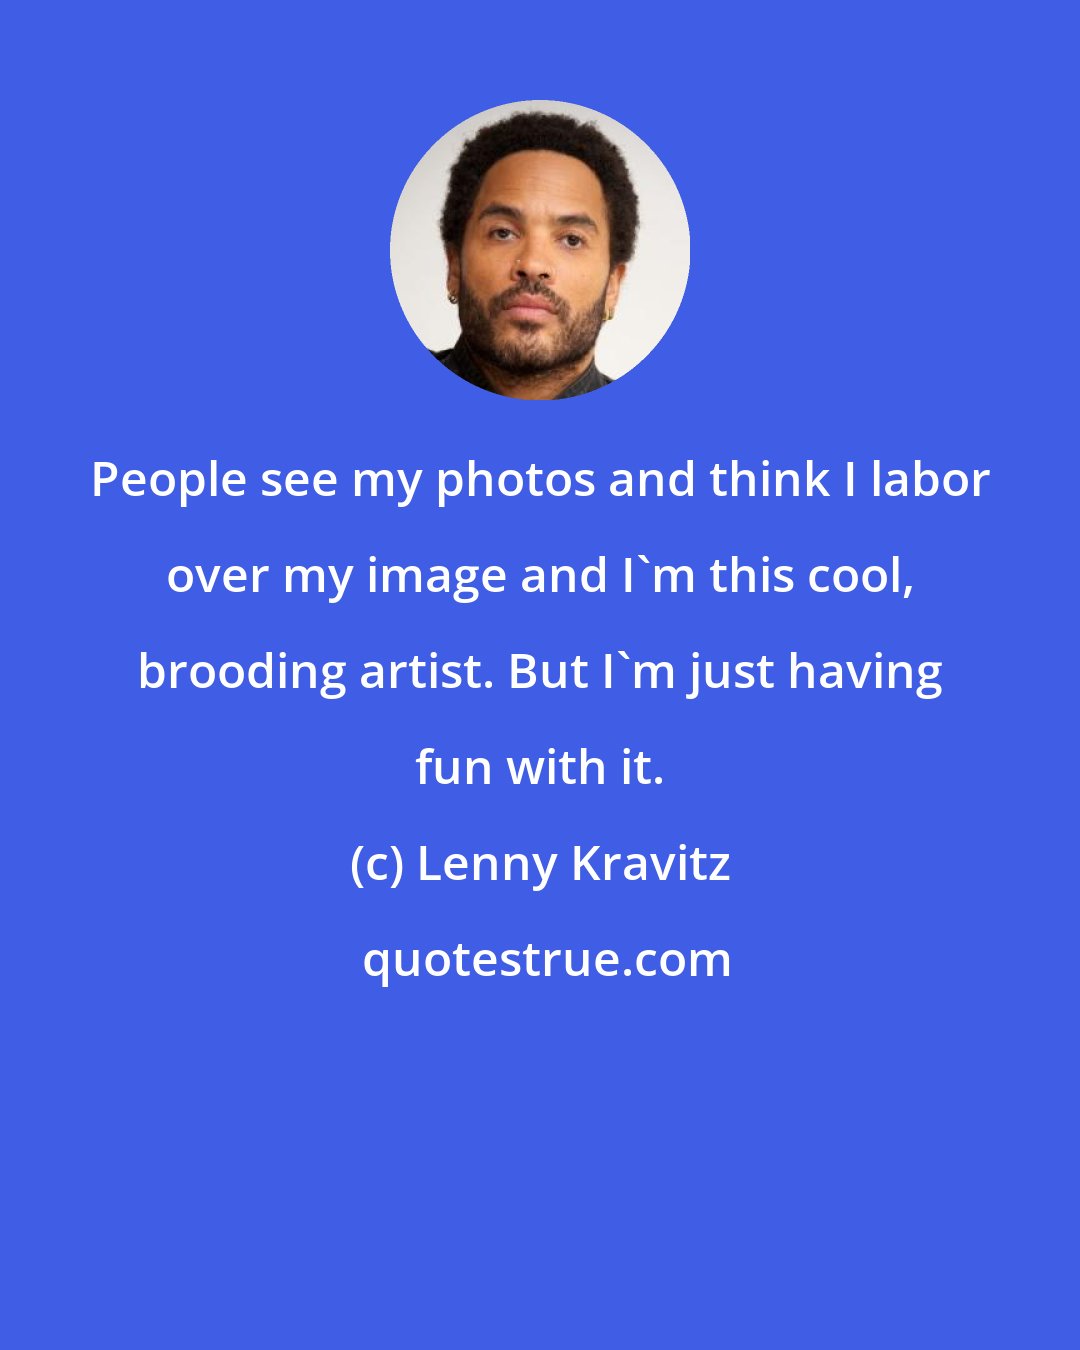 Lenny Kravitz: People see my photos and think I labor over my image and I'm this cool, brooding artist. But I'm just having fun with it.